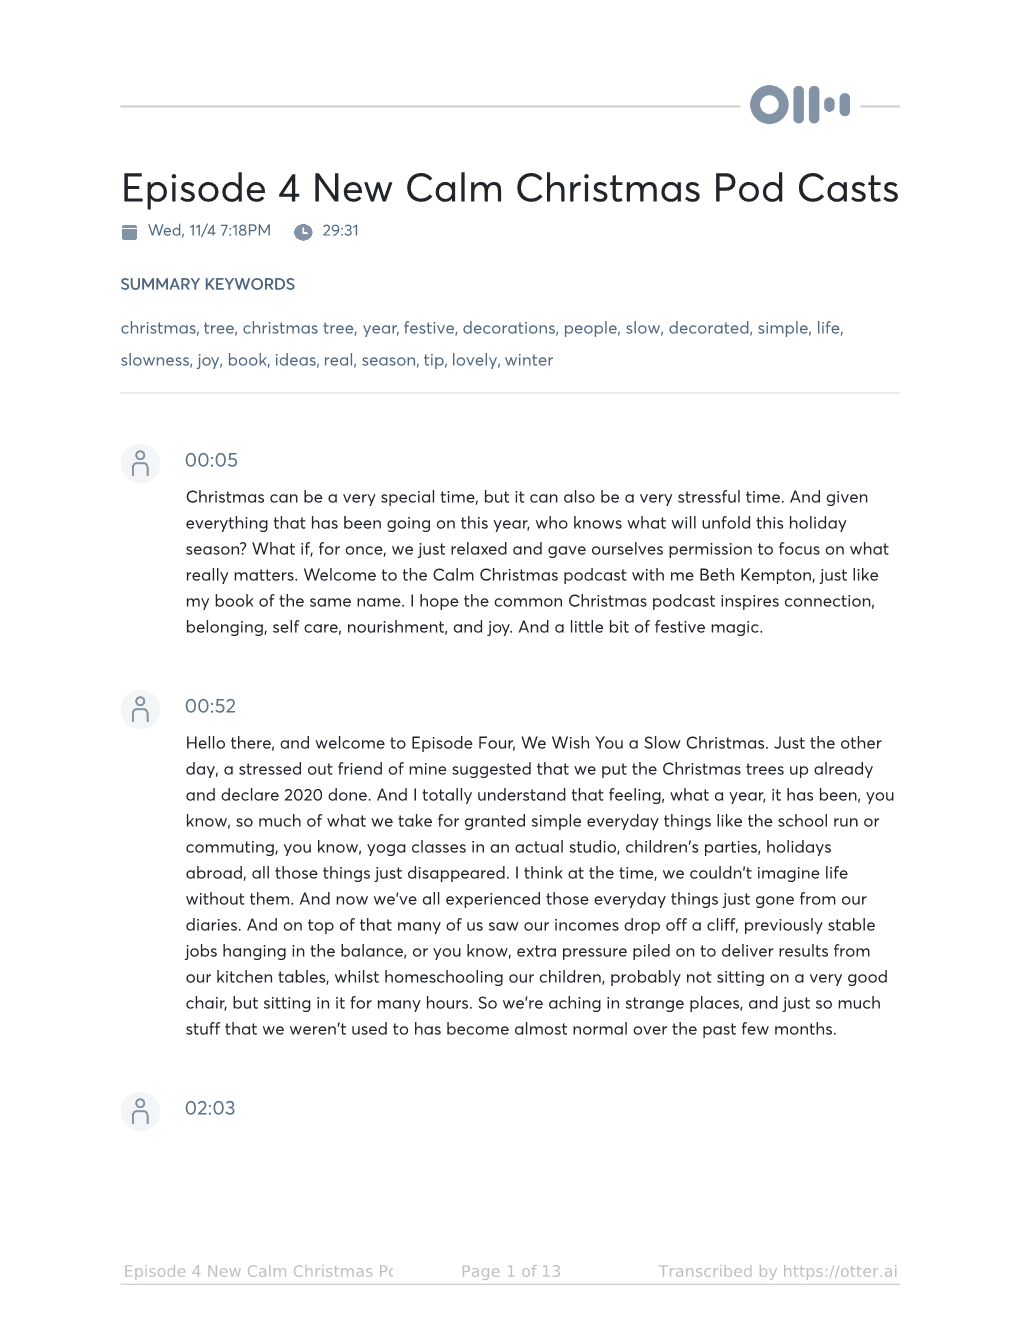 Episode 4 New Calm Christmas Pod Casts Wed, 11/4 7:18PM 29:31